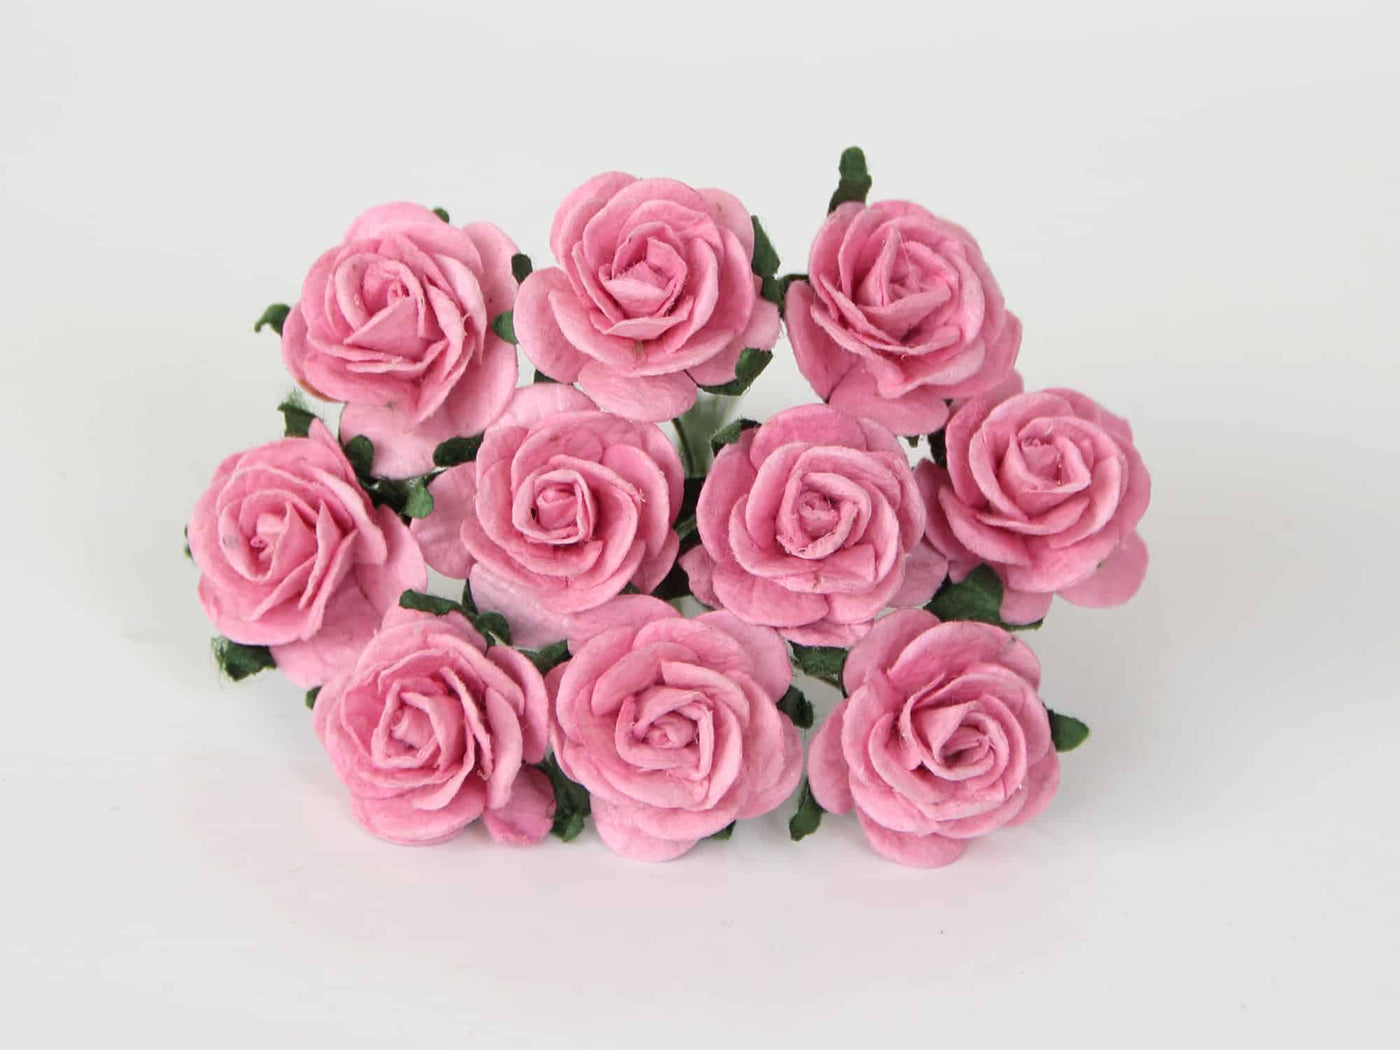 10 Pcs - Mulberry Paper Flowers - 2cm Rounded Petal Roses - Pink